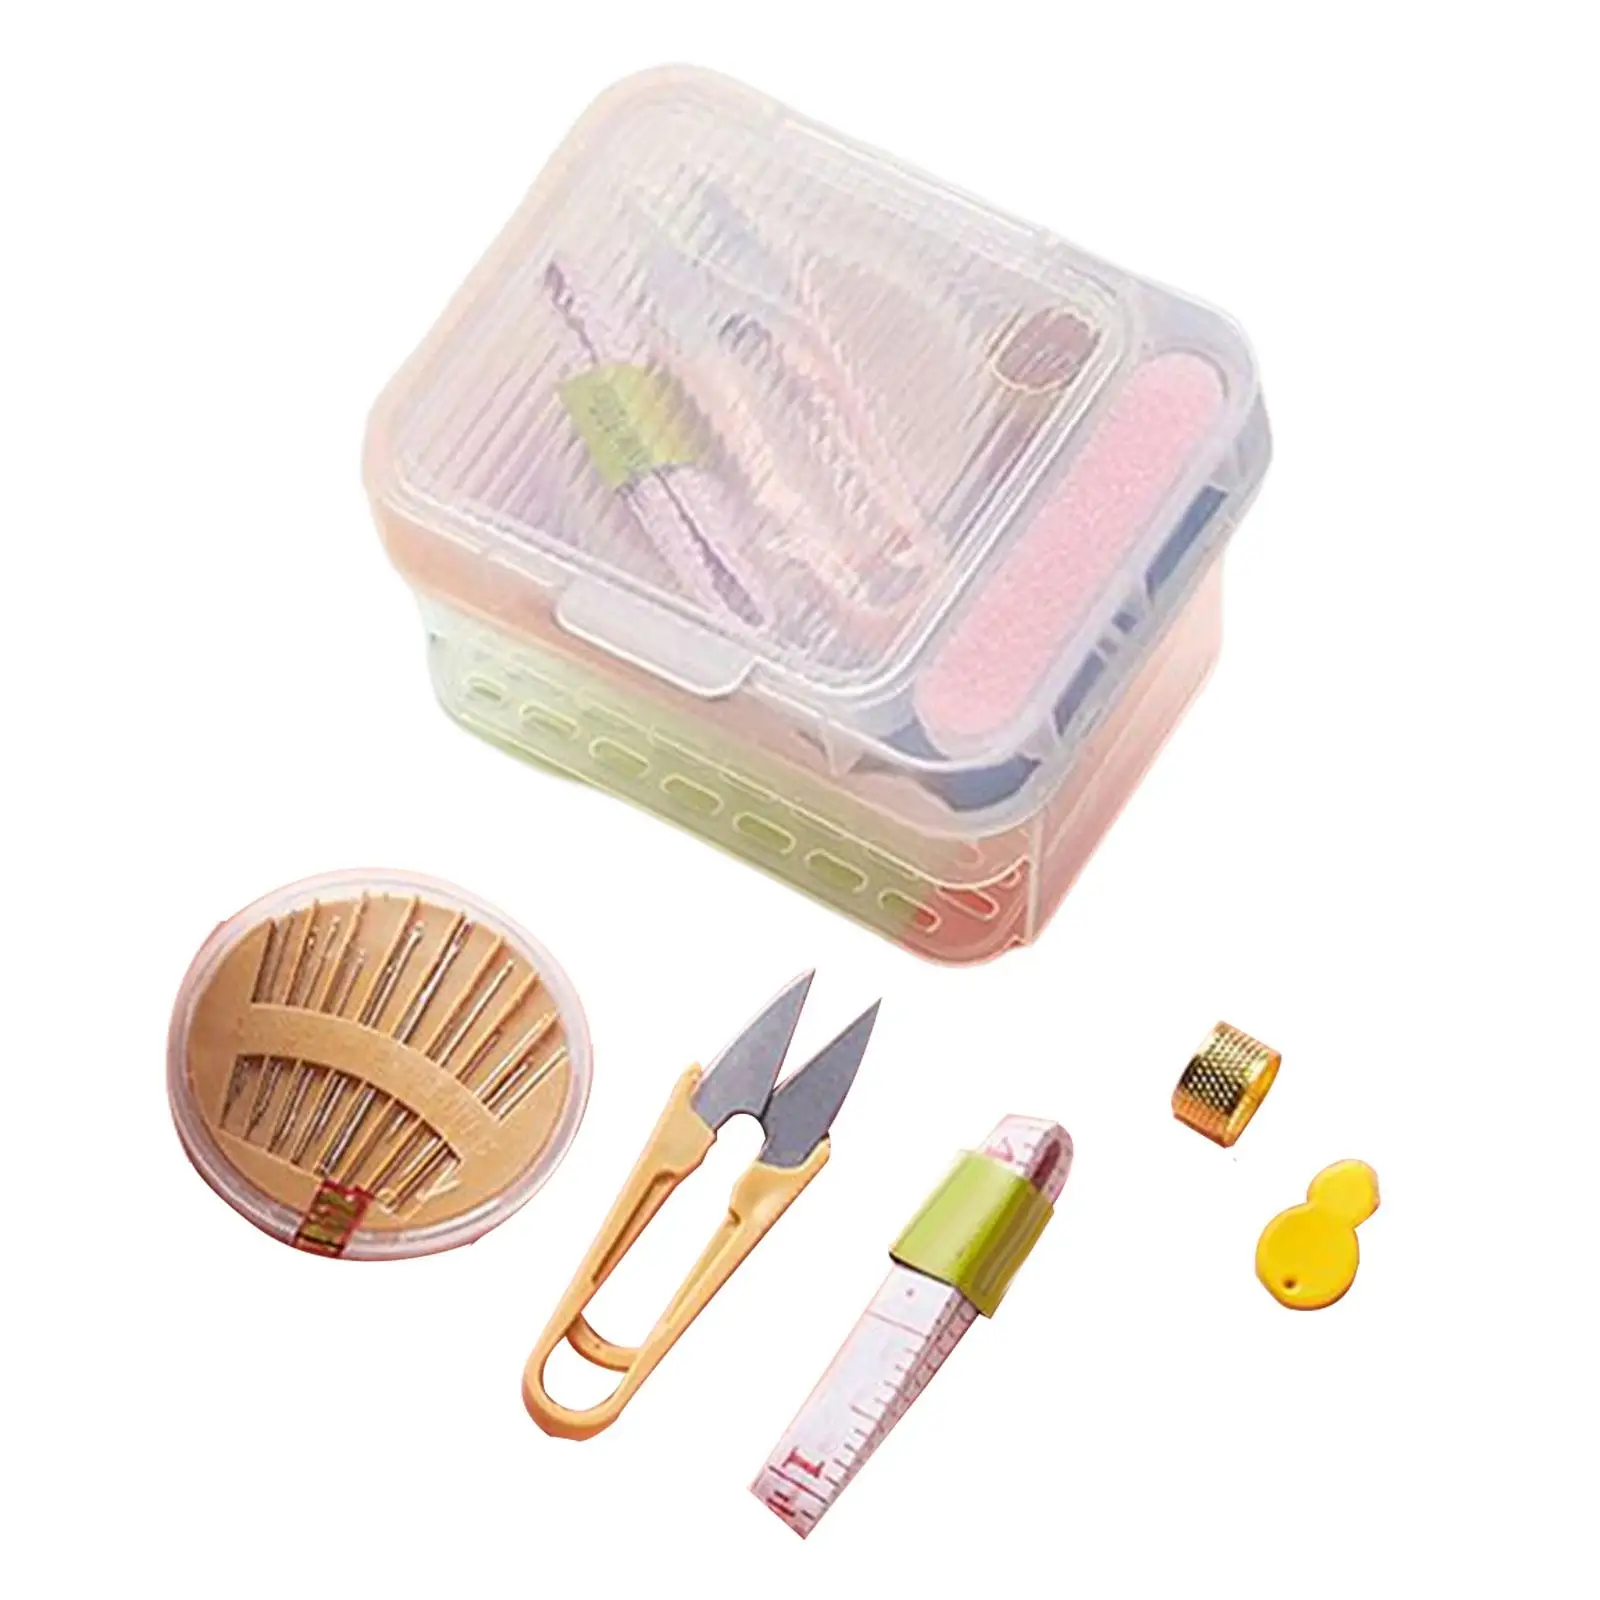 Travel Small Sewing Kit Supplies Two Layer Drawer Compact Accessories Essential Basic Sewing Kit for Quick Clothing Repairs